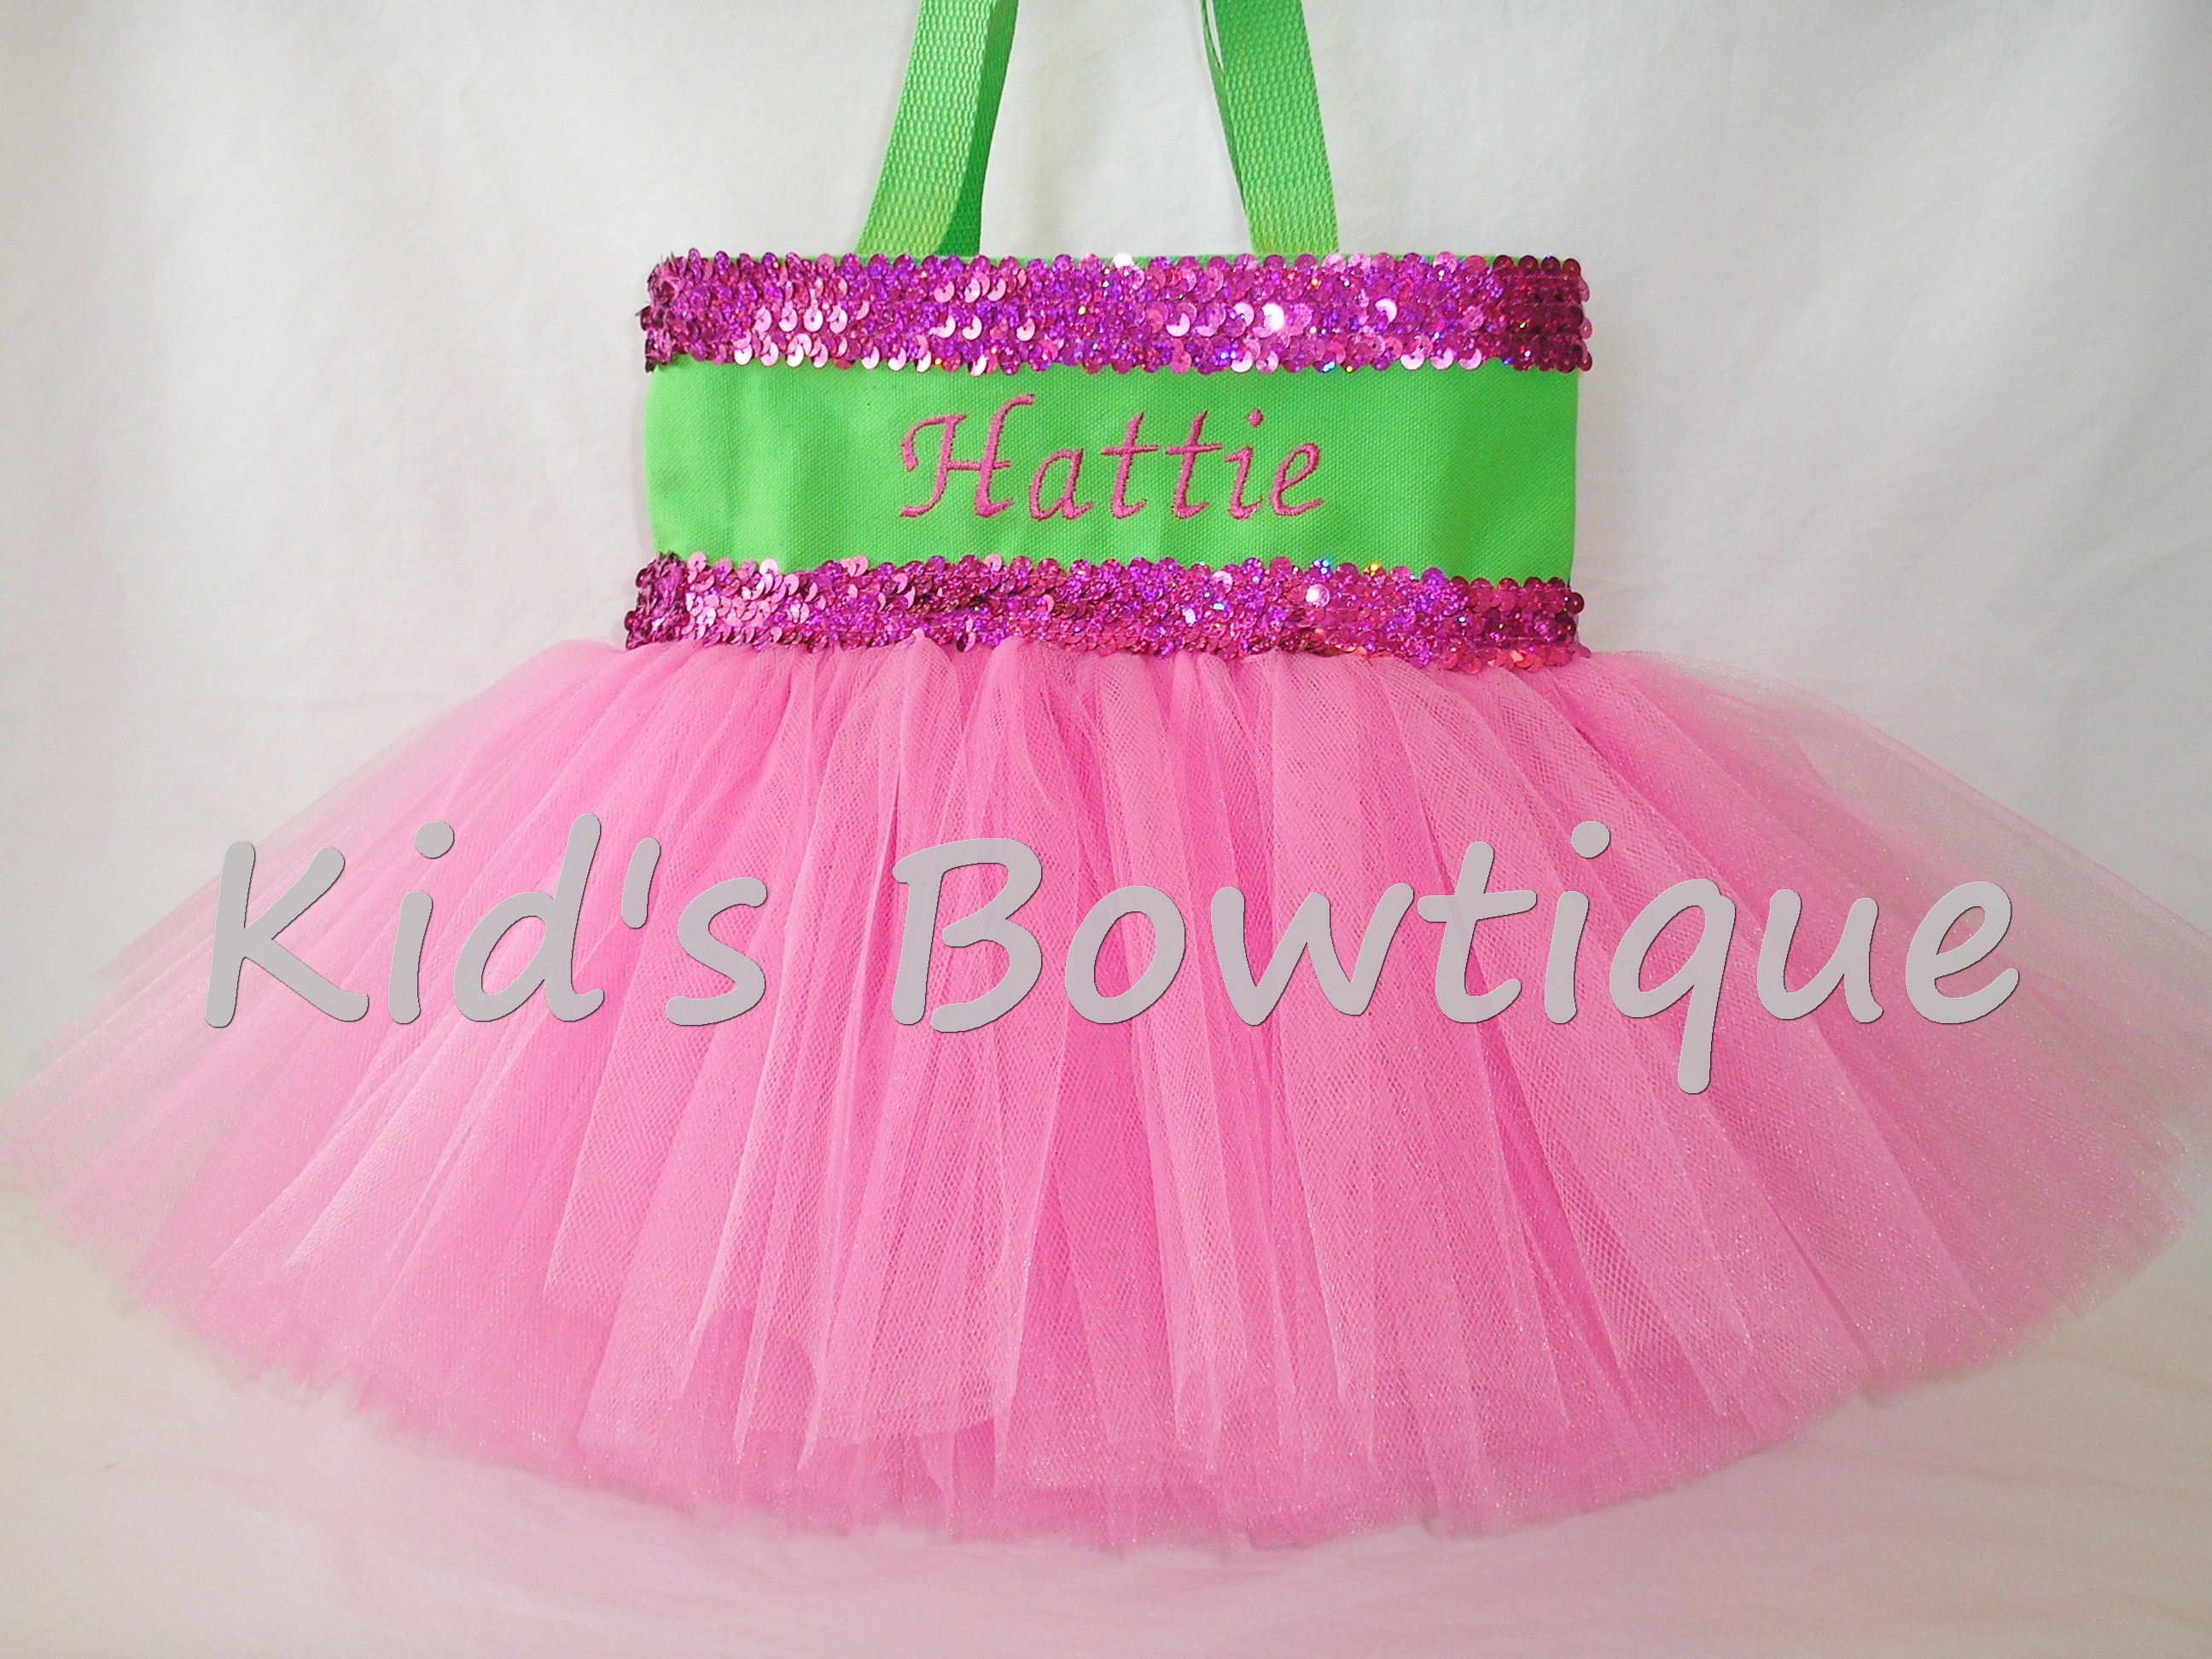 Monogrammed Tutu Tote Bag - ttb46 Lime with Double Hot Pink Sequins